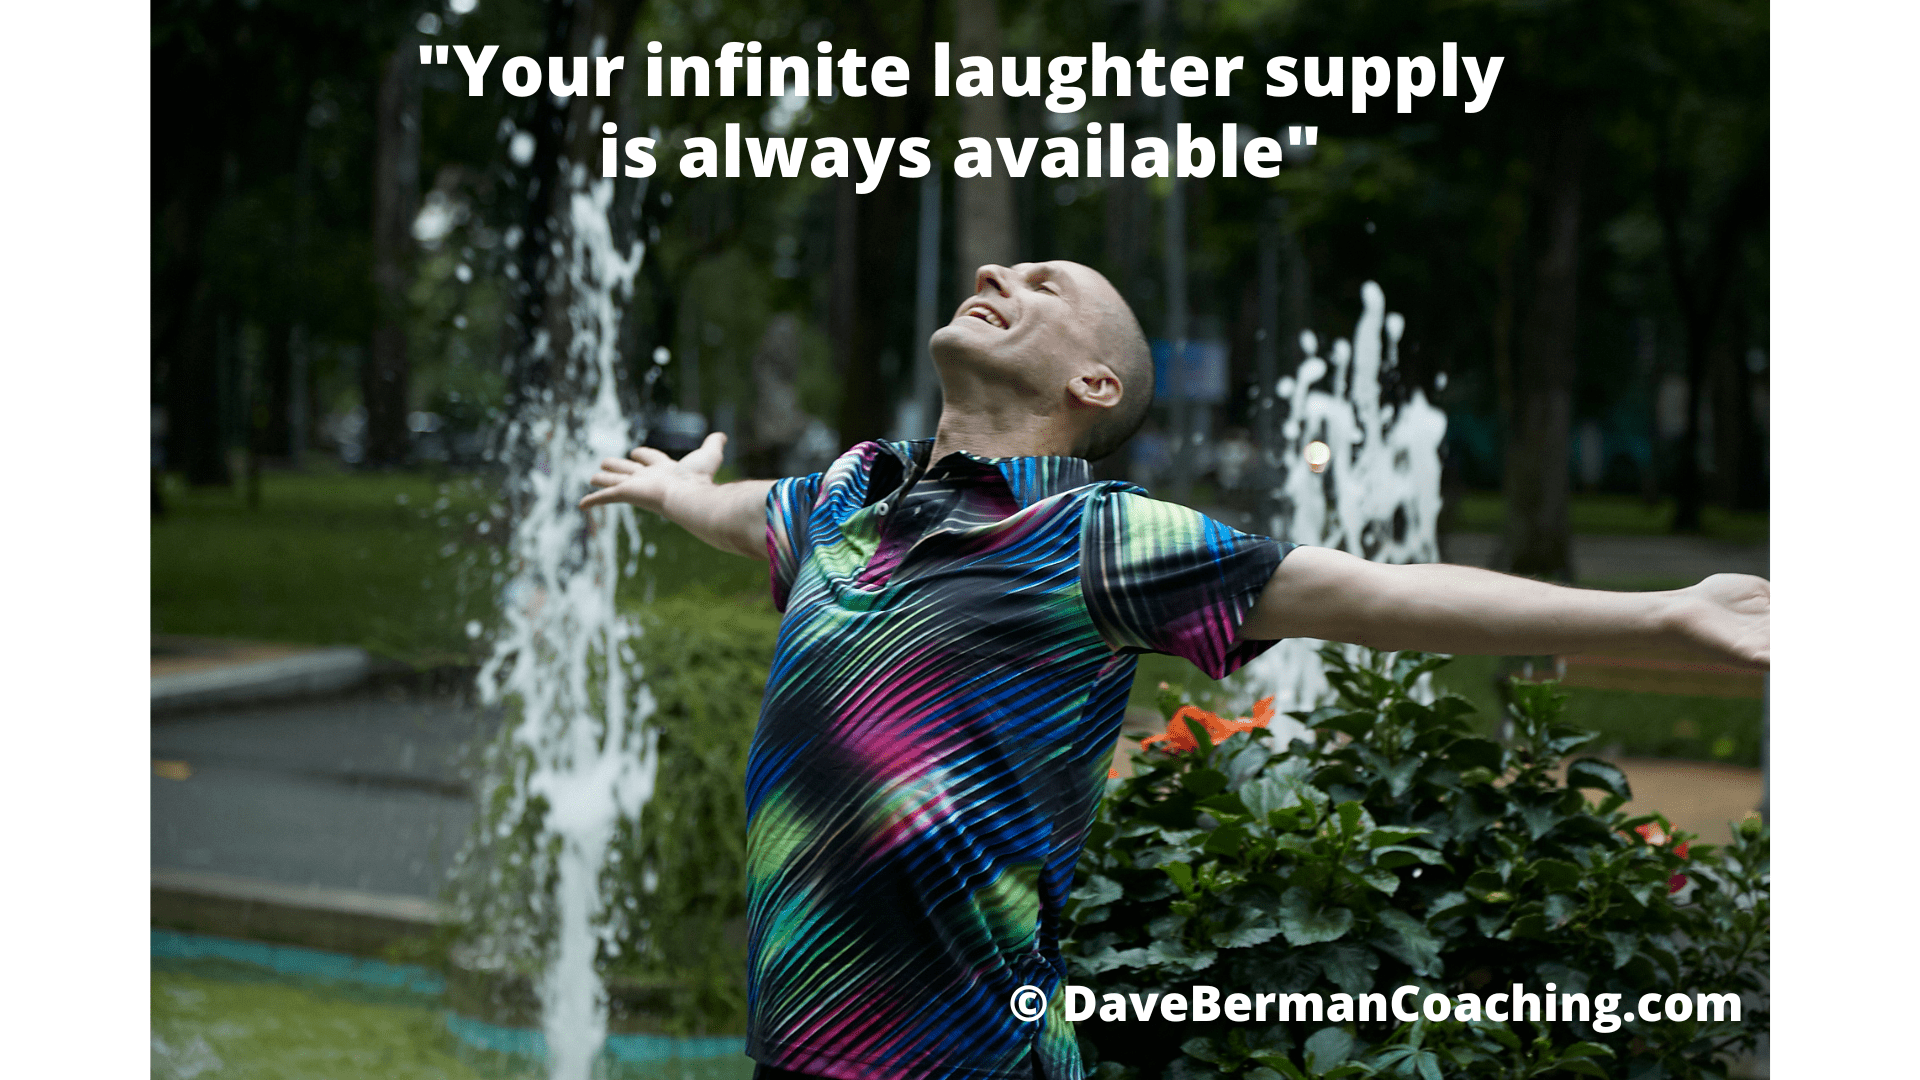 Dave Berman stands in a Saigon park with fountains around him, his arms spread wide, head tilted back, laughing. The caption says: "Your infinite laughter supply is always available." © DaveBermanCoaching.com